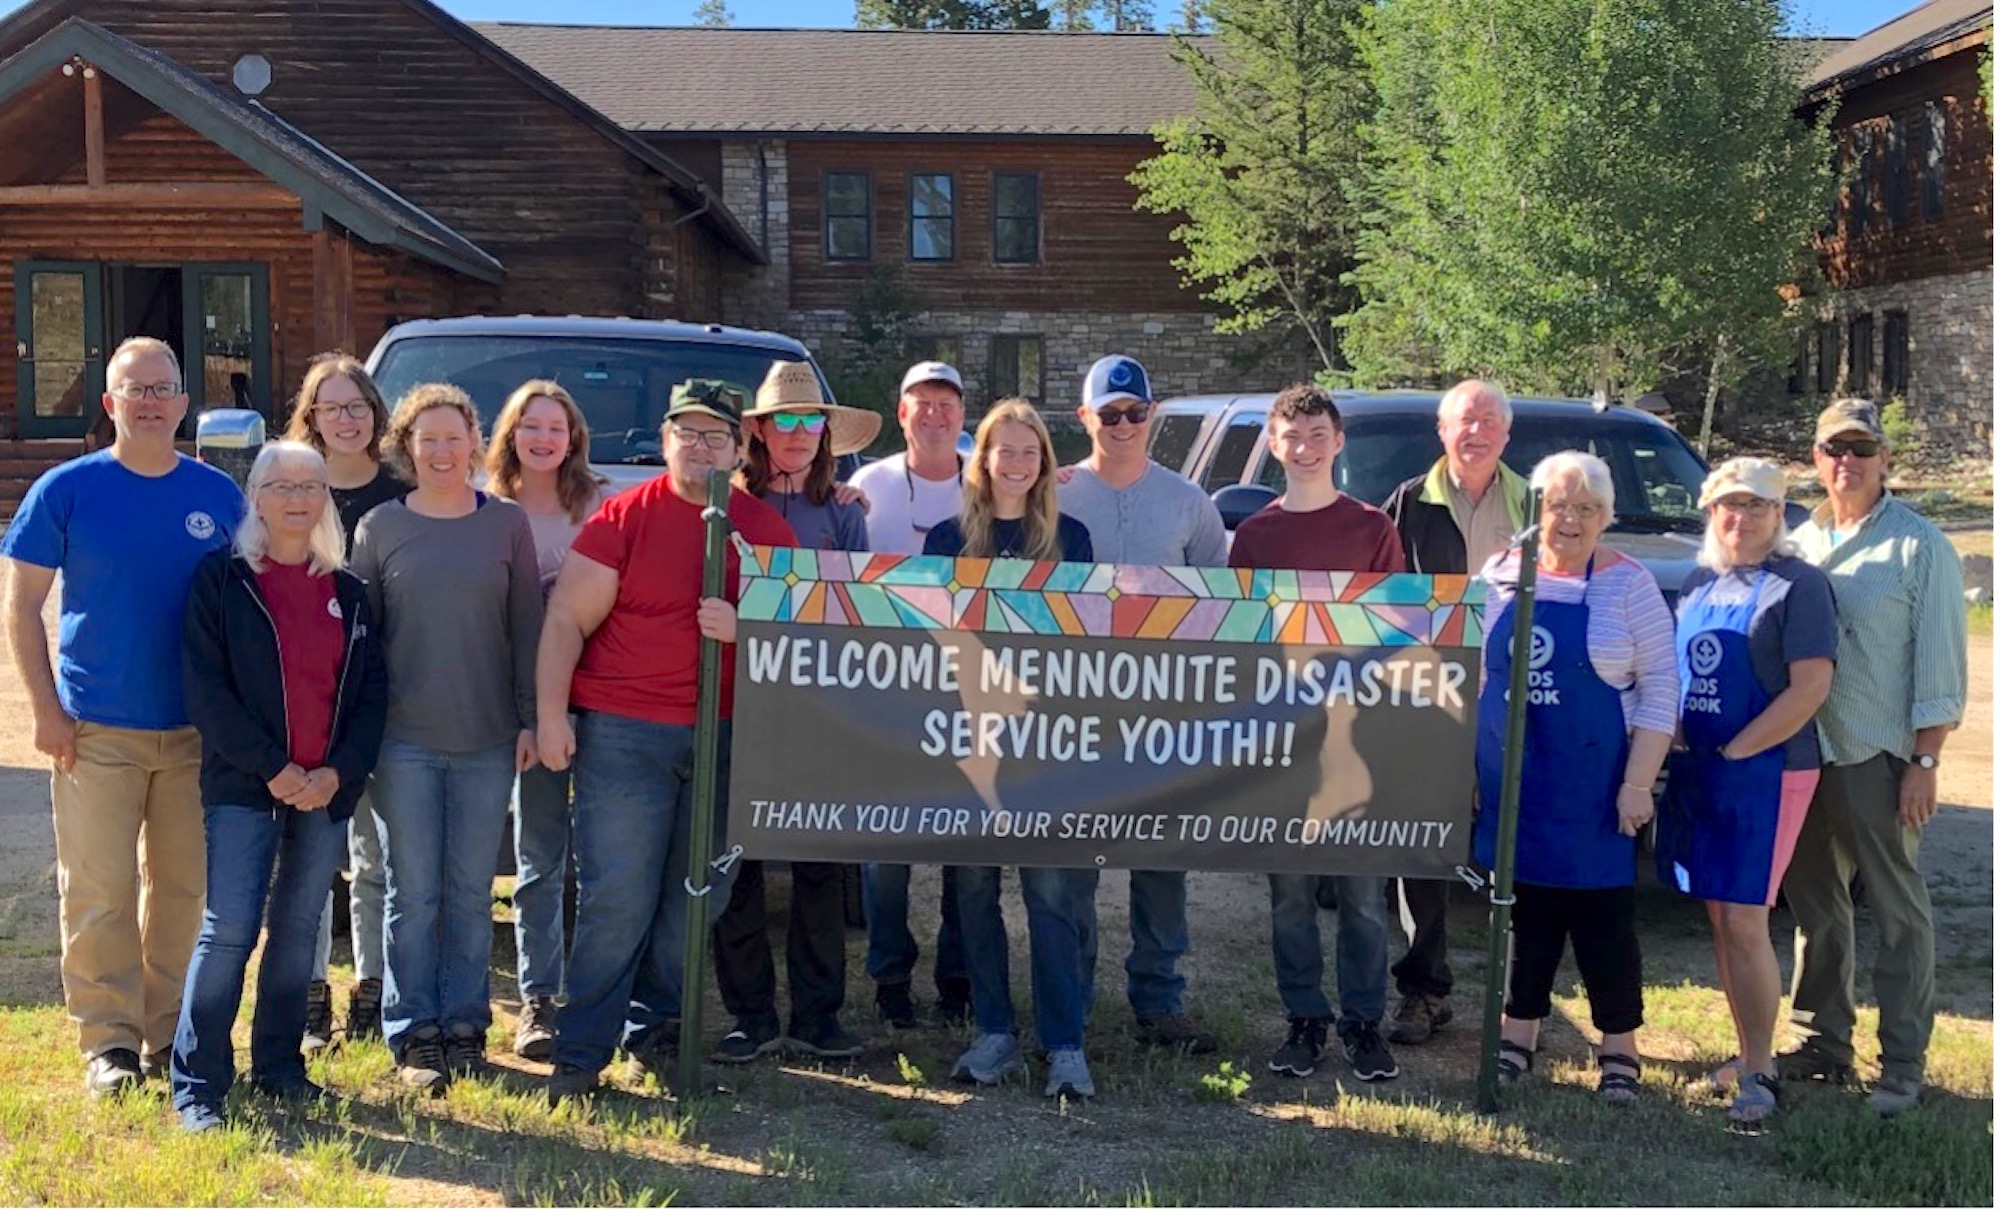 Group photo of youth and adults in Grand Lake, CO. Picture taken in front of Base Camp